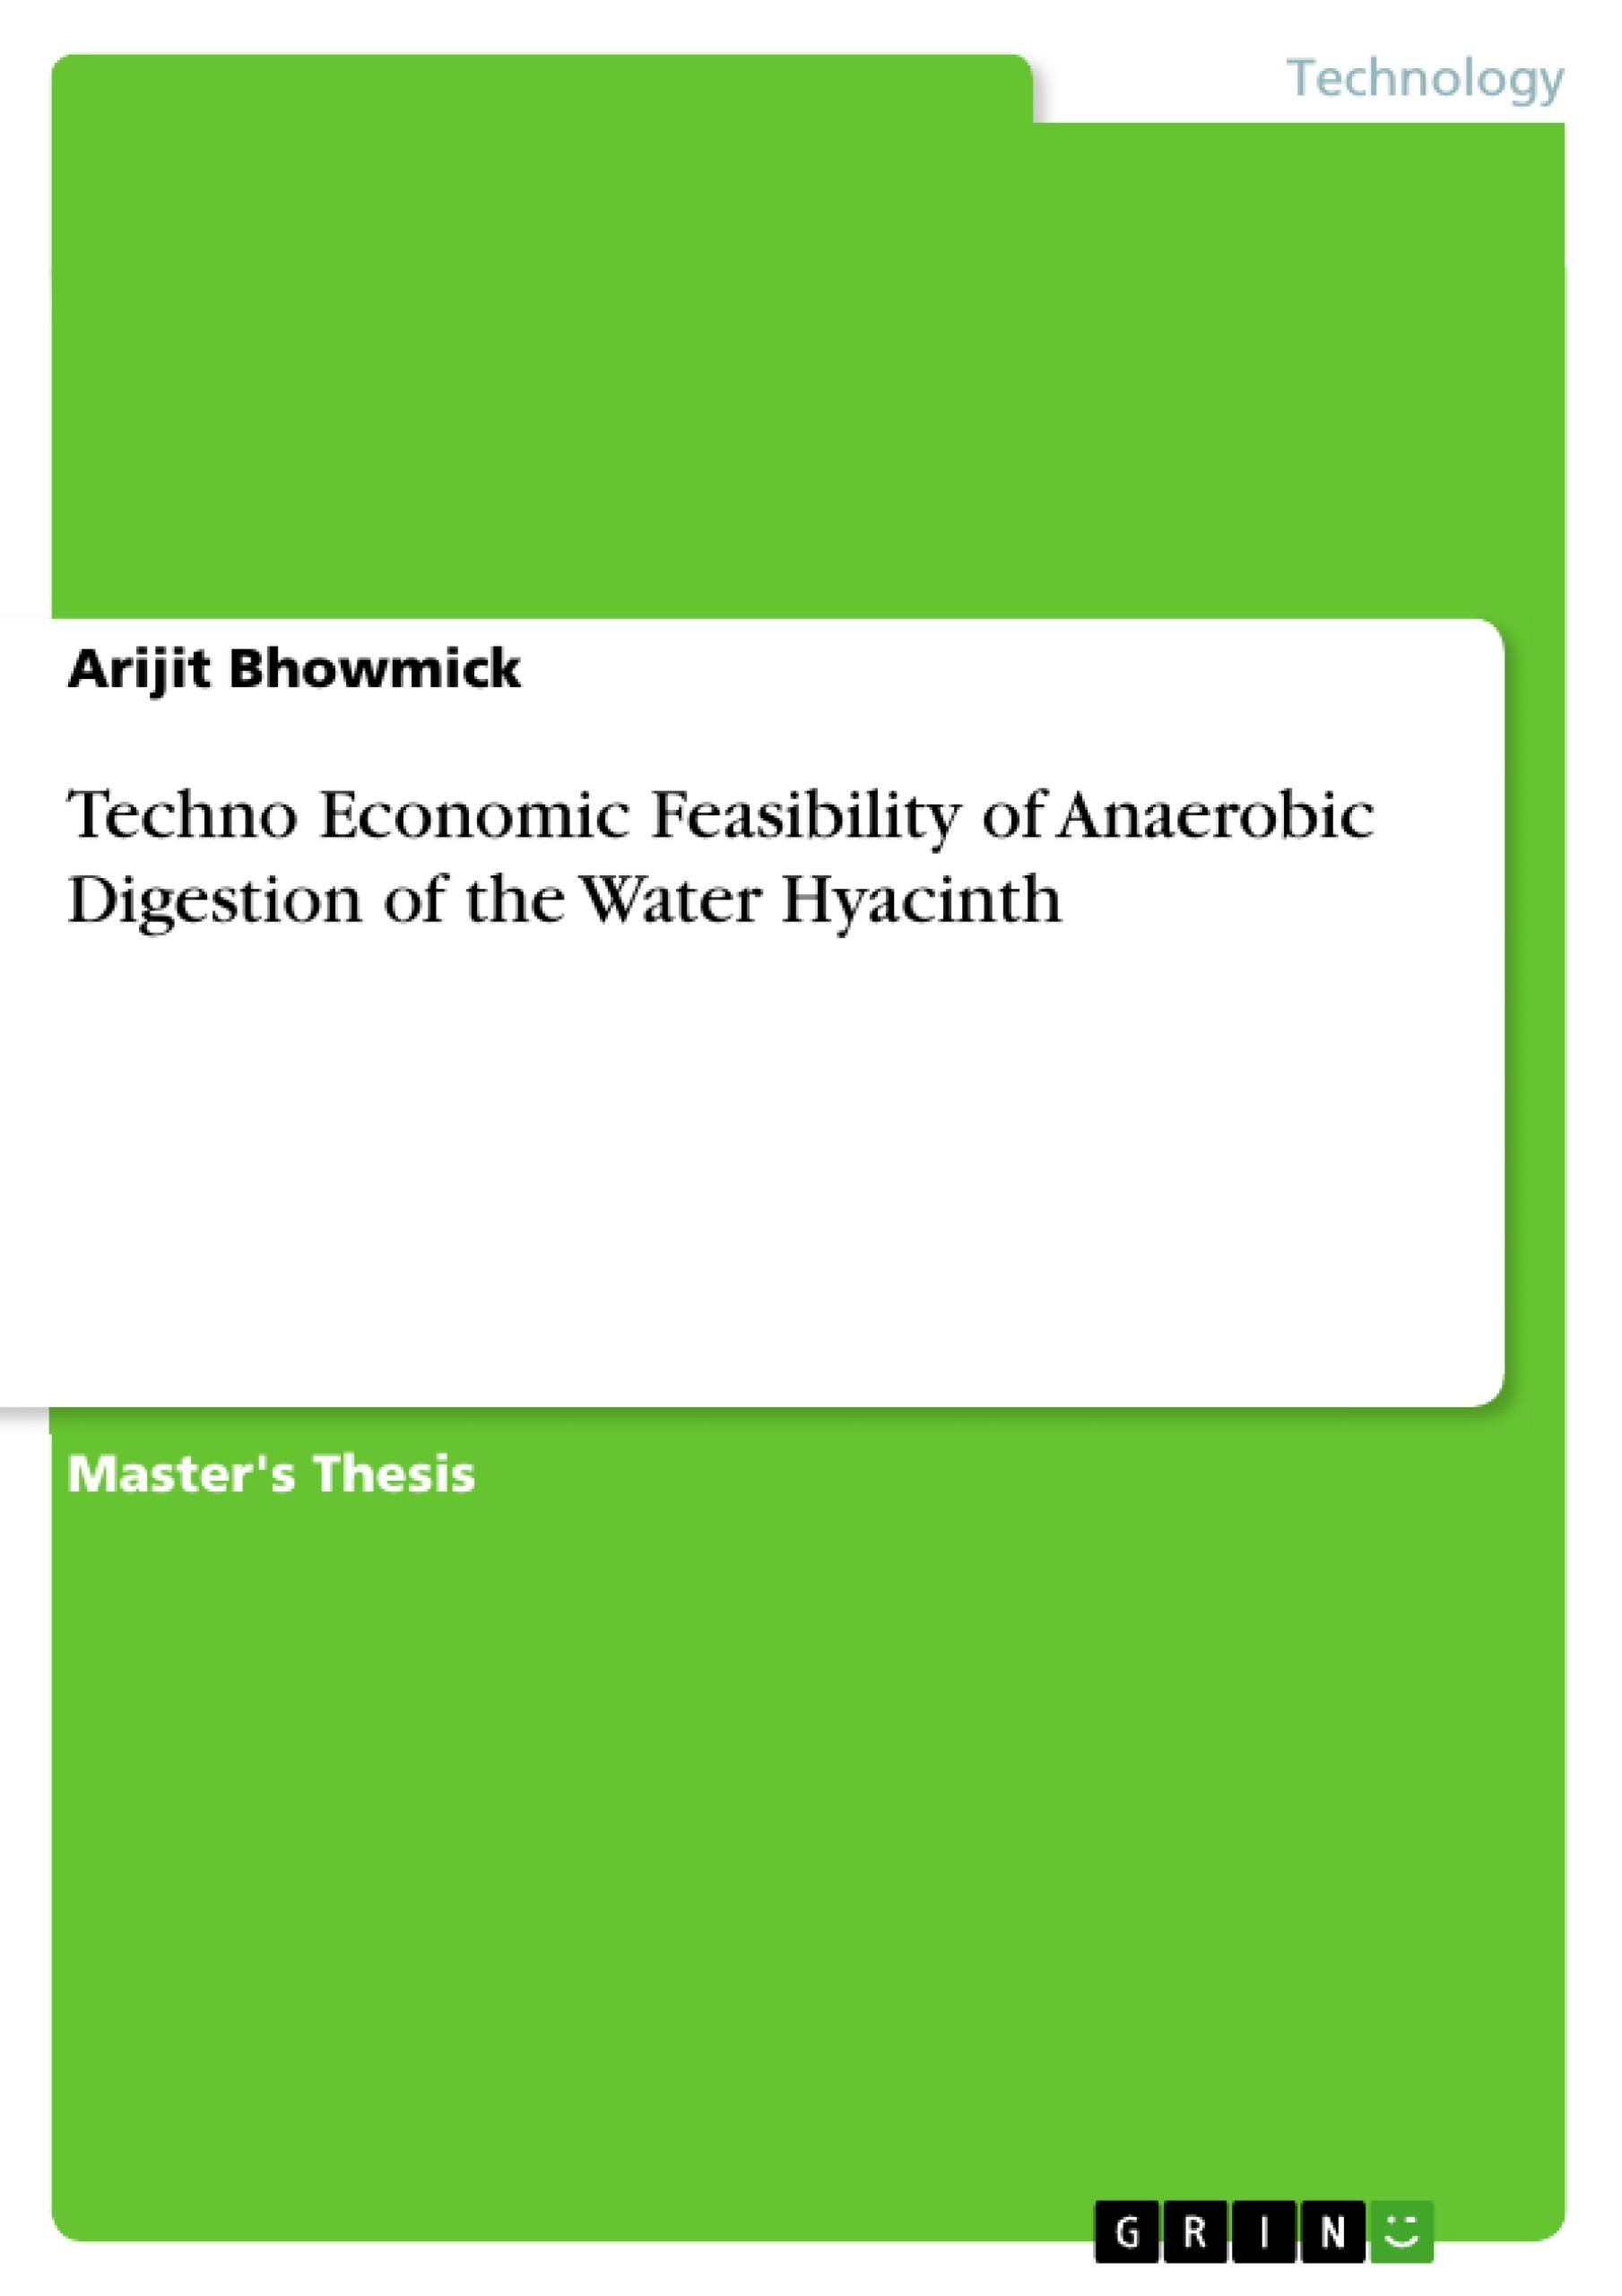 Titre: Techno Economic Feasibility of Anaerobic Digestion of the Water Hyacinth